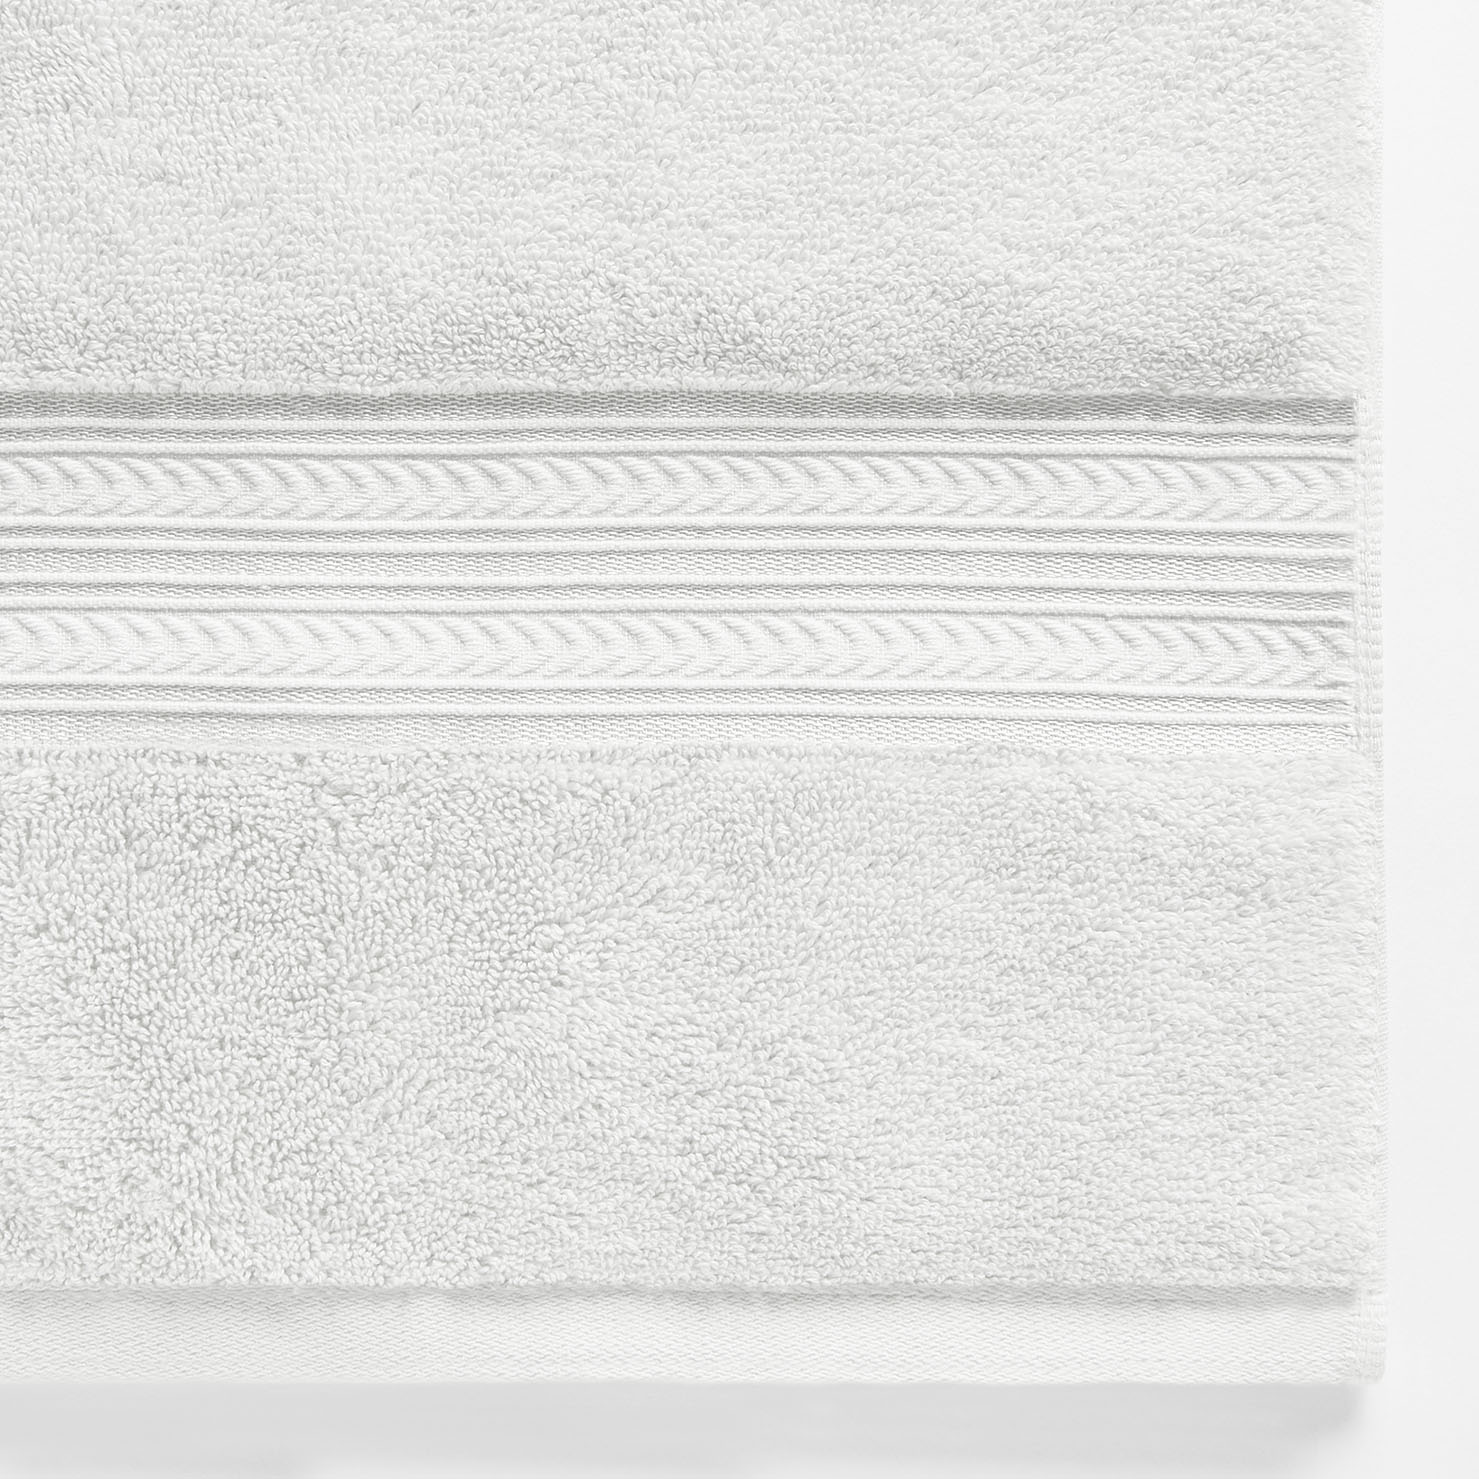 Arctic White Bath Sheet, Better Homes & Gardens Thick and Plush Towel Collection - image 2 of 5